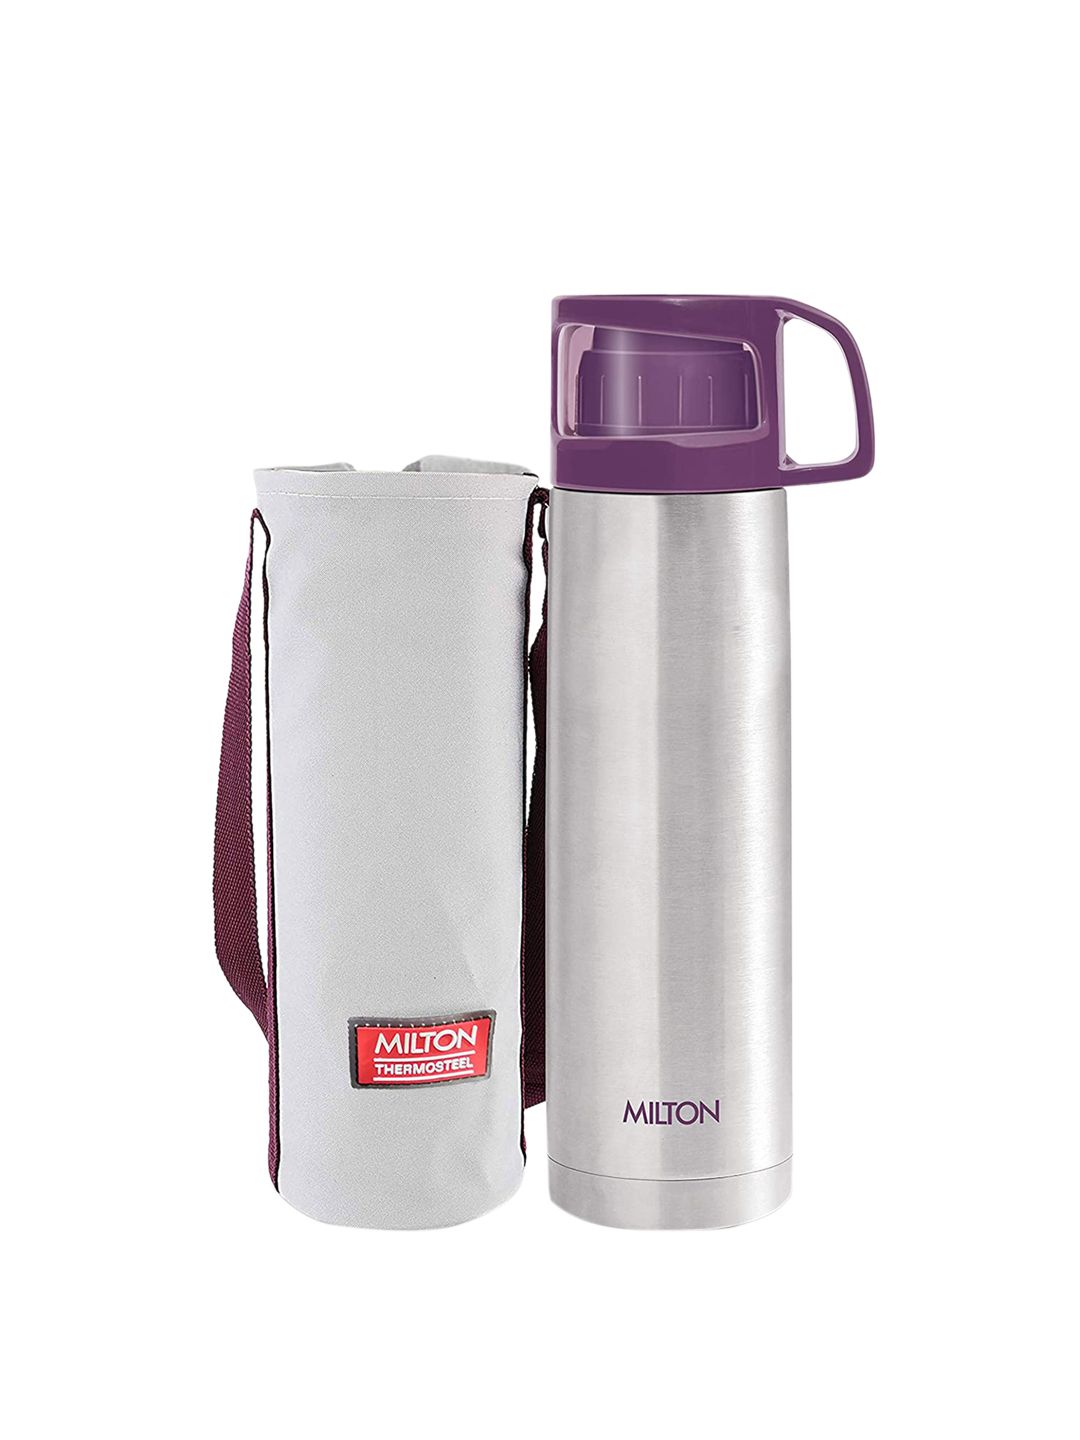 Milton Silver Toned Thermosteel Bottle With Glassy Drinking Cup Lid 750 ml Price in India